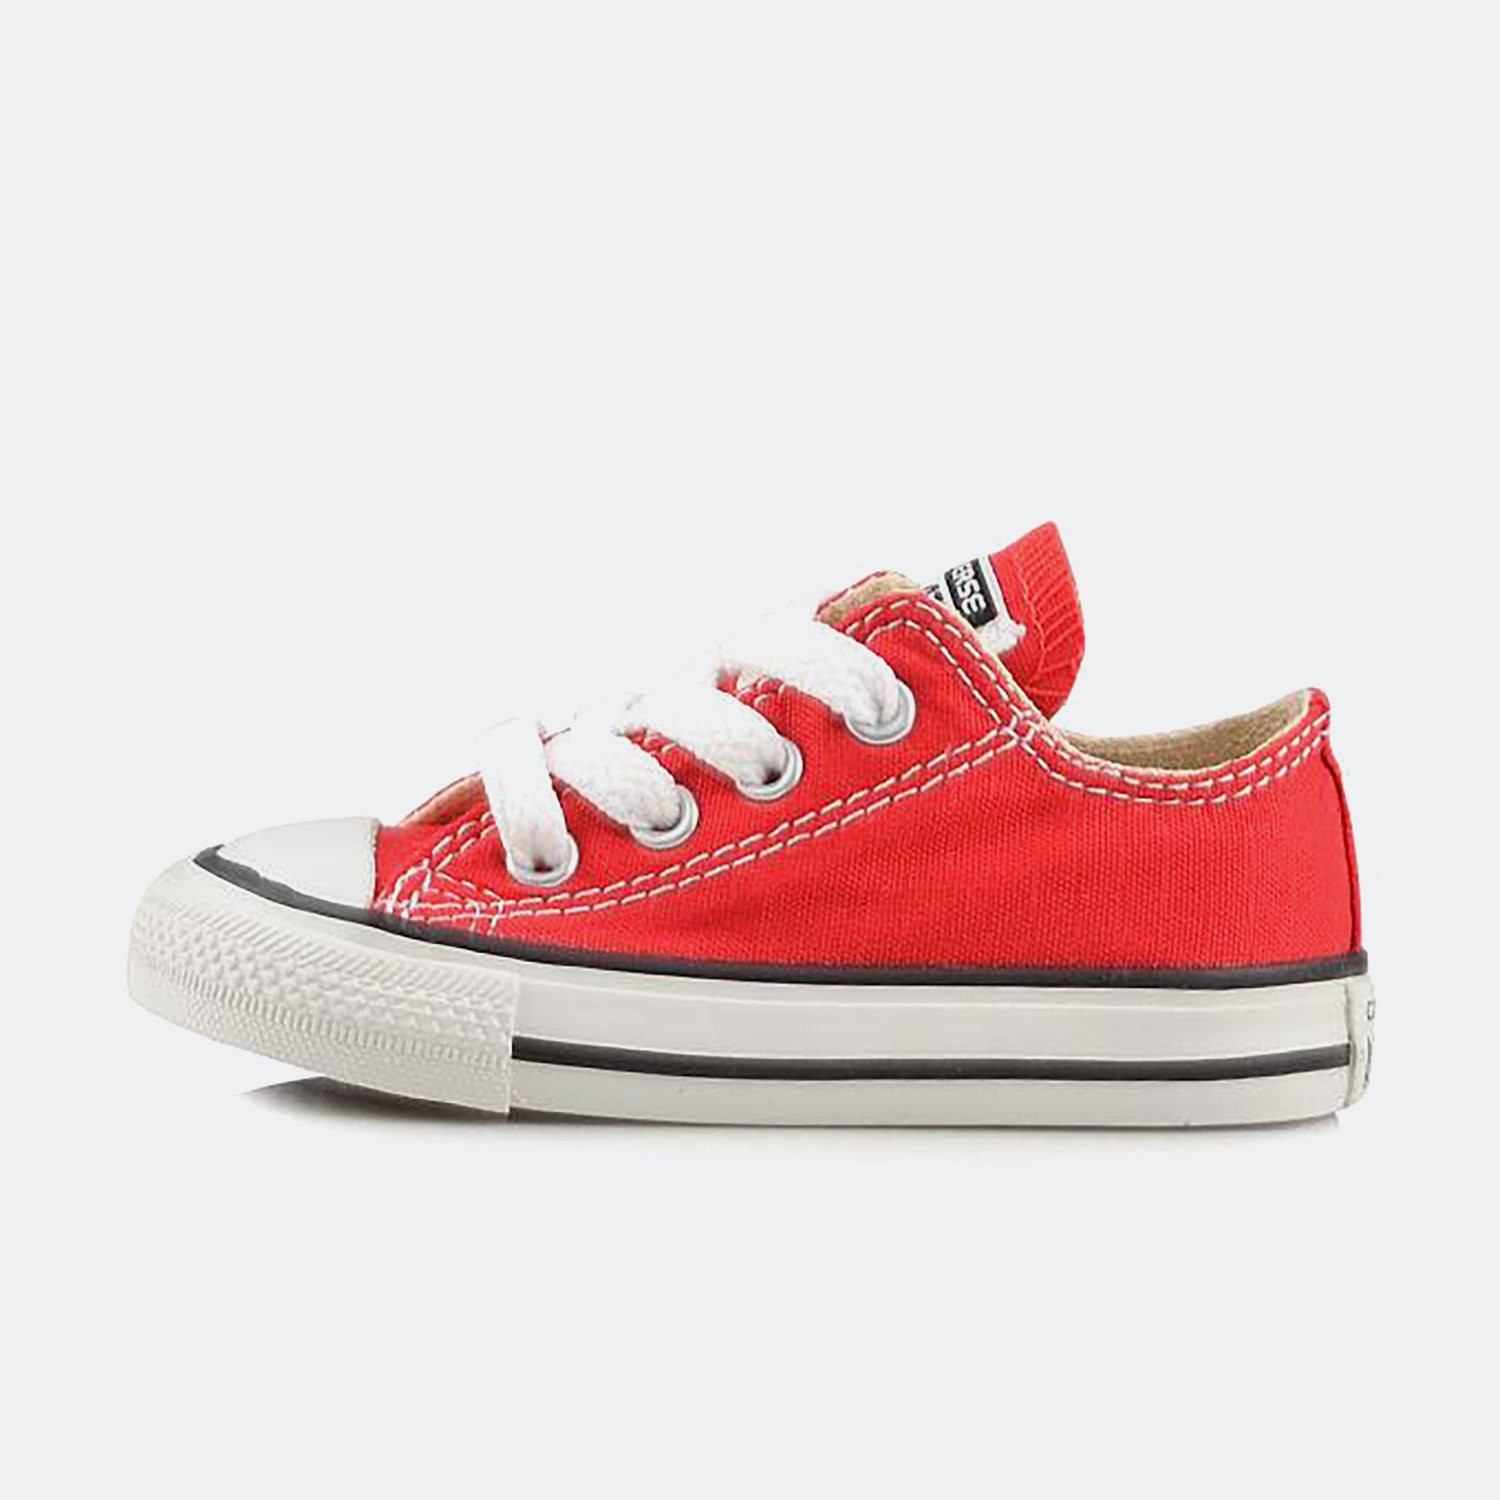 Converse Chuck Taylor All Star Βρεφικά Παπούτσια (1080040706_4638)